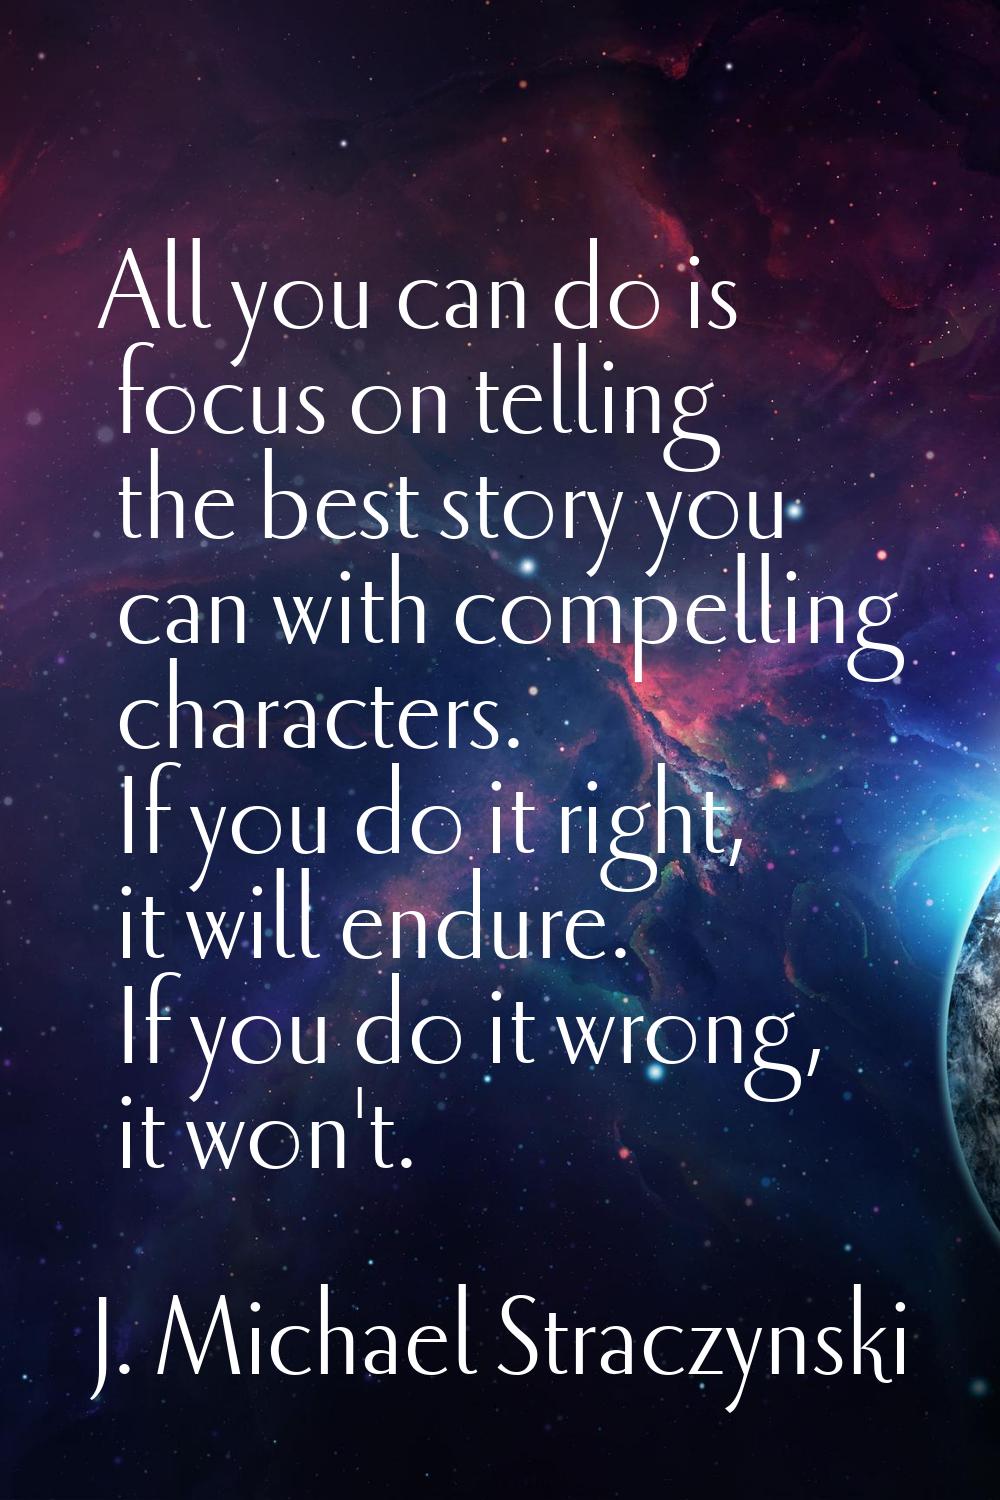 All you can do is focus on telling the best story you can with compelling characters. If you do it 